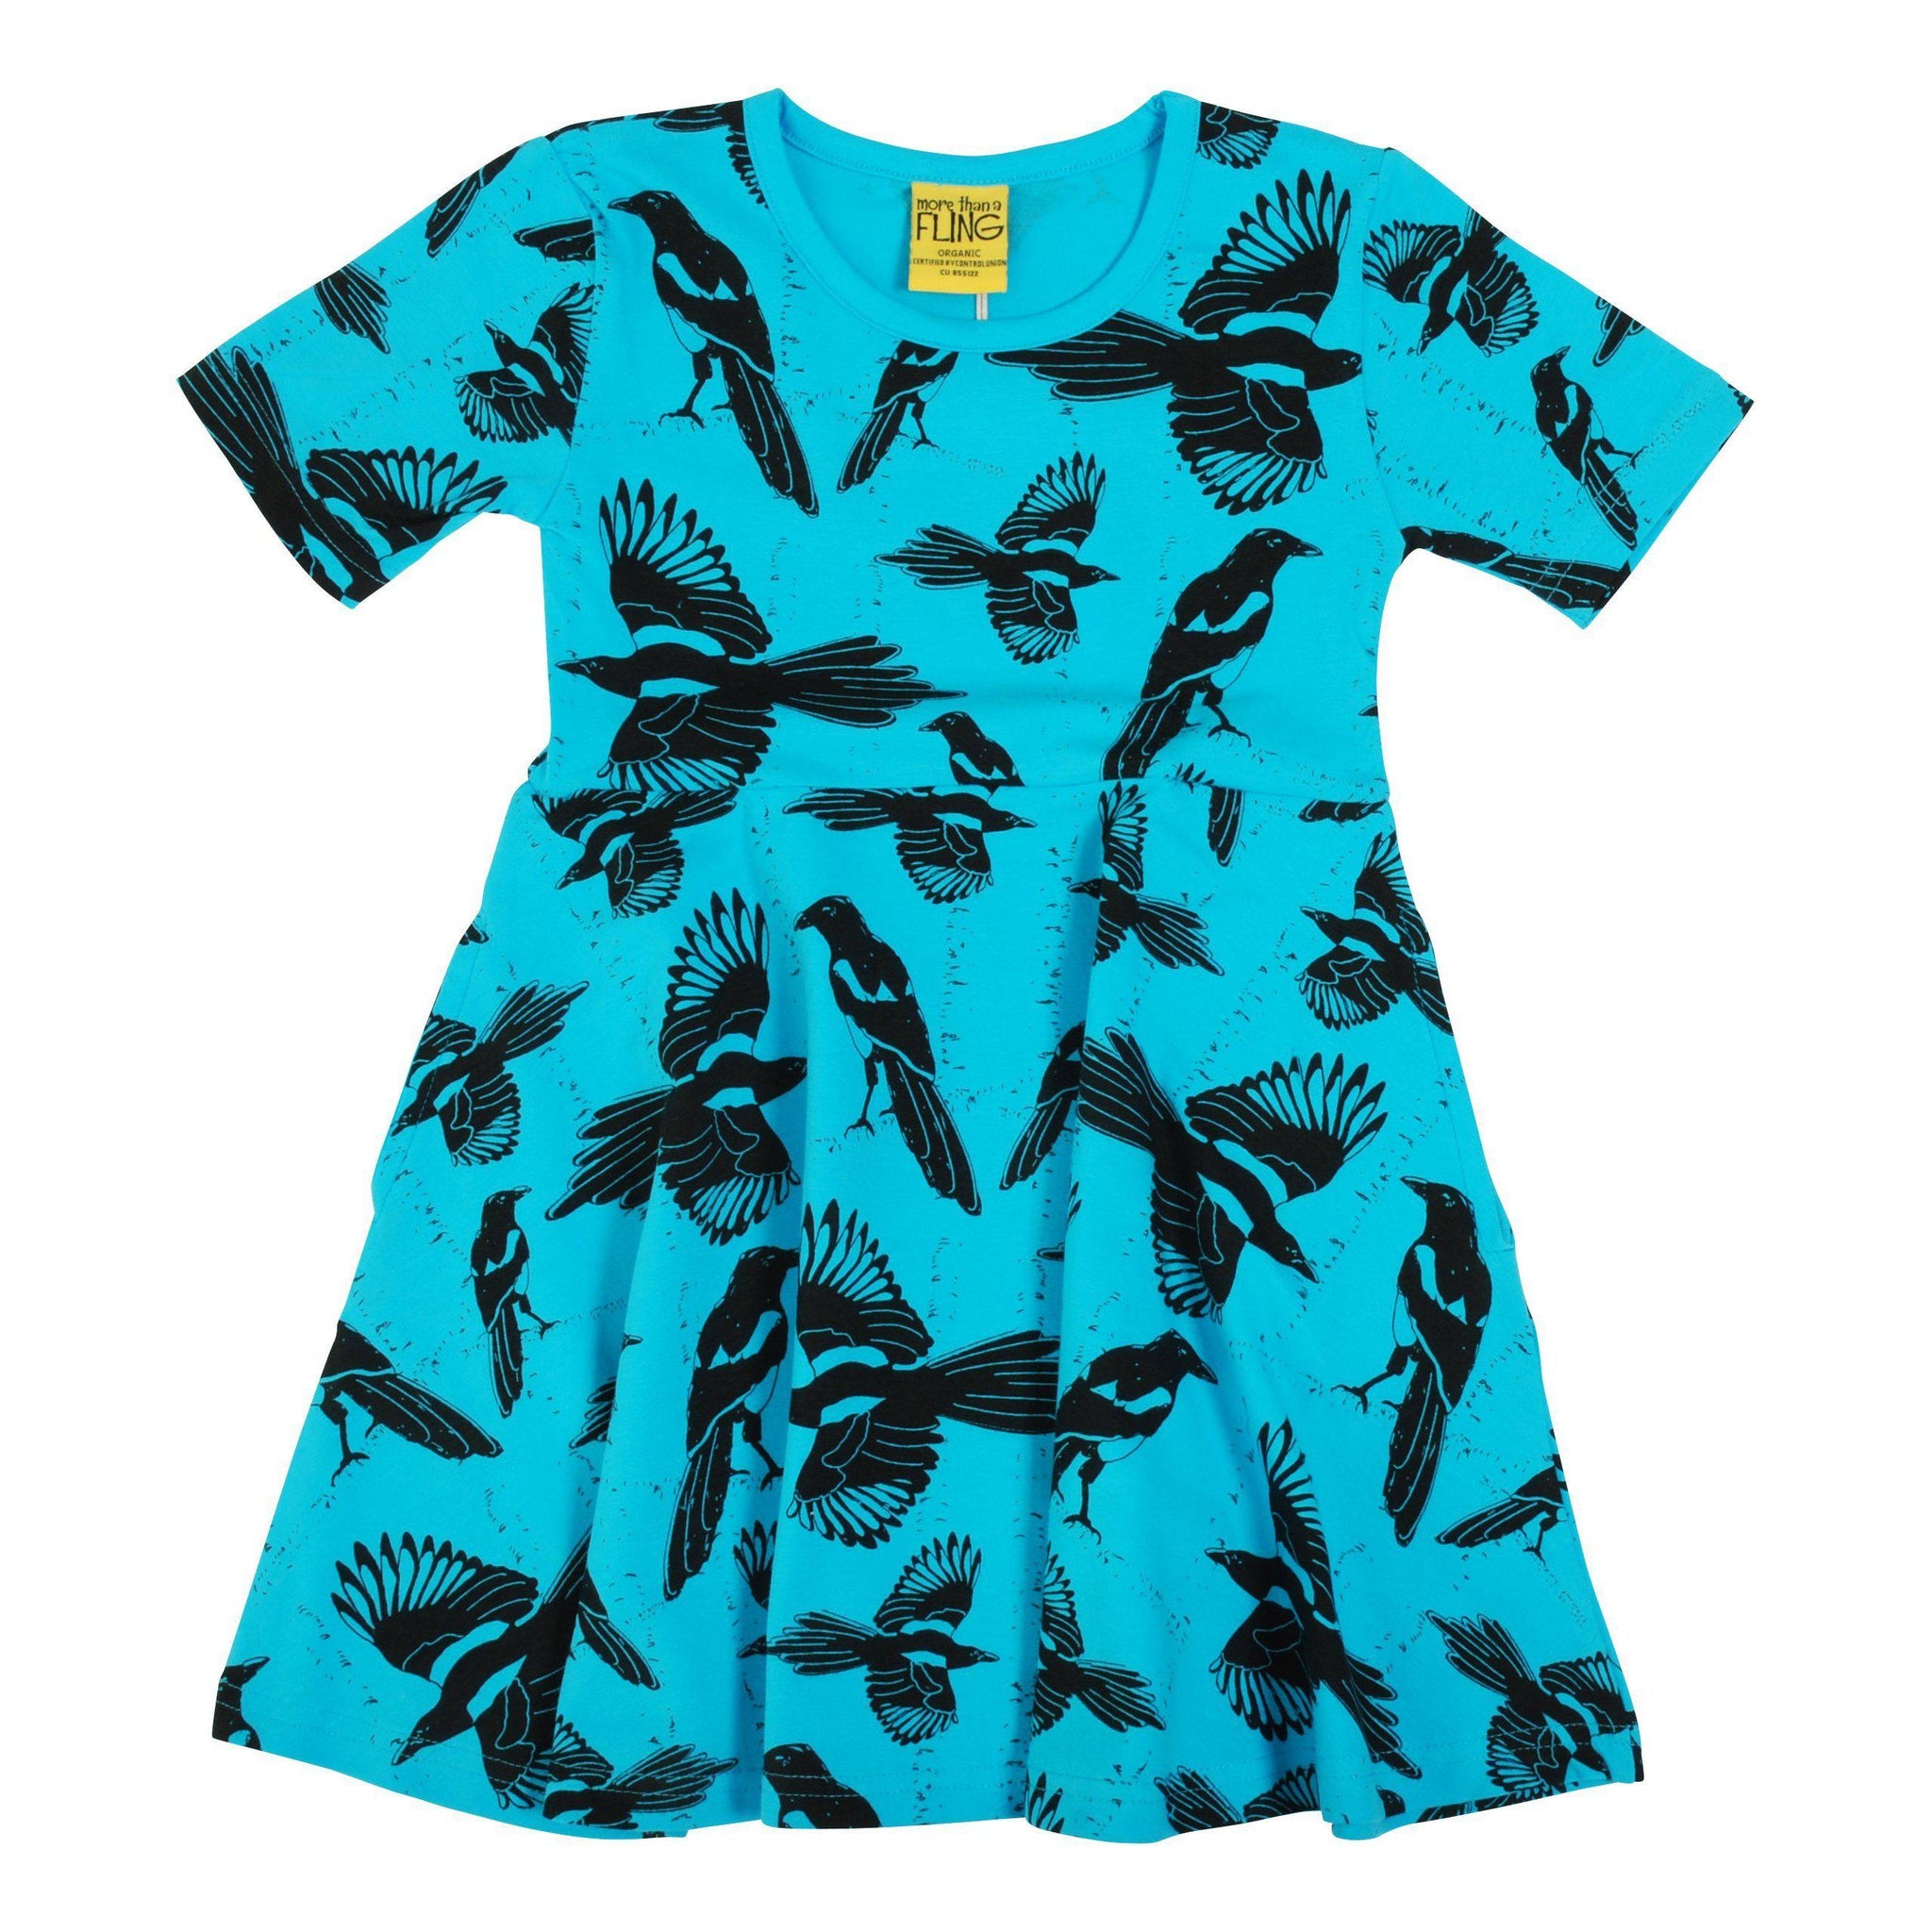 More than a Fling - Pica Pica Skater Dress (Blue Atoll) (2 Years)